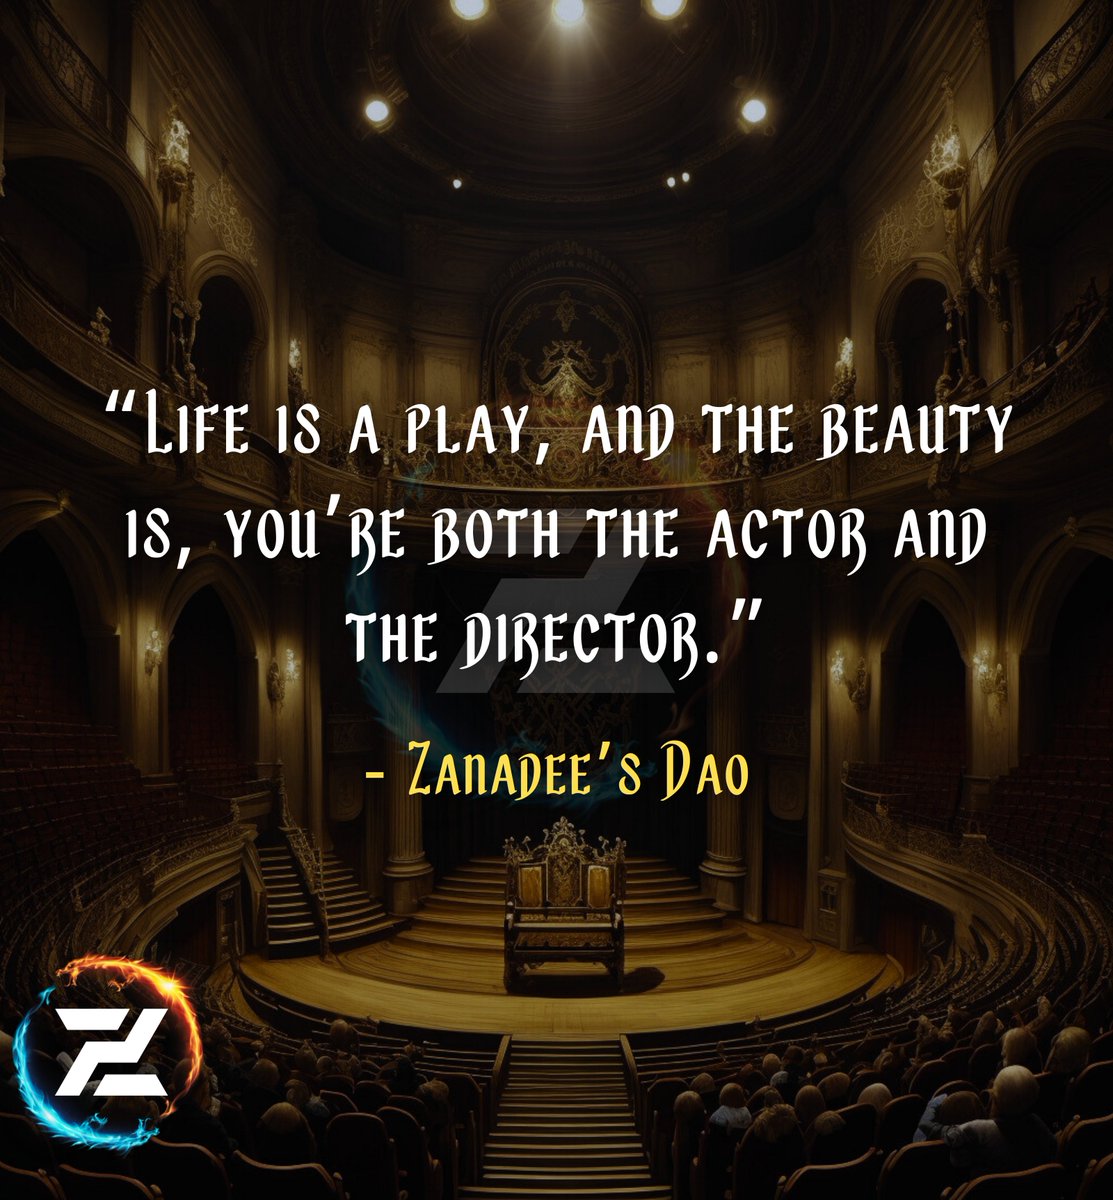 Drama of Existence

“Life is a play, and the beauty is, you’re both the actor and the director.”

#Creator #SpiritualPower #WriteYourStory #SpiritualJourney #ChangeYourMindset

Zanadee’s Dao